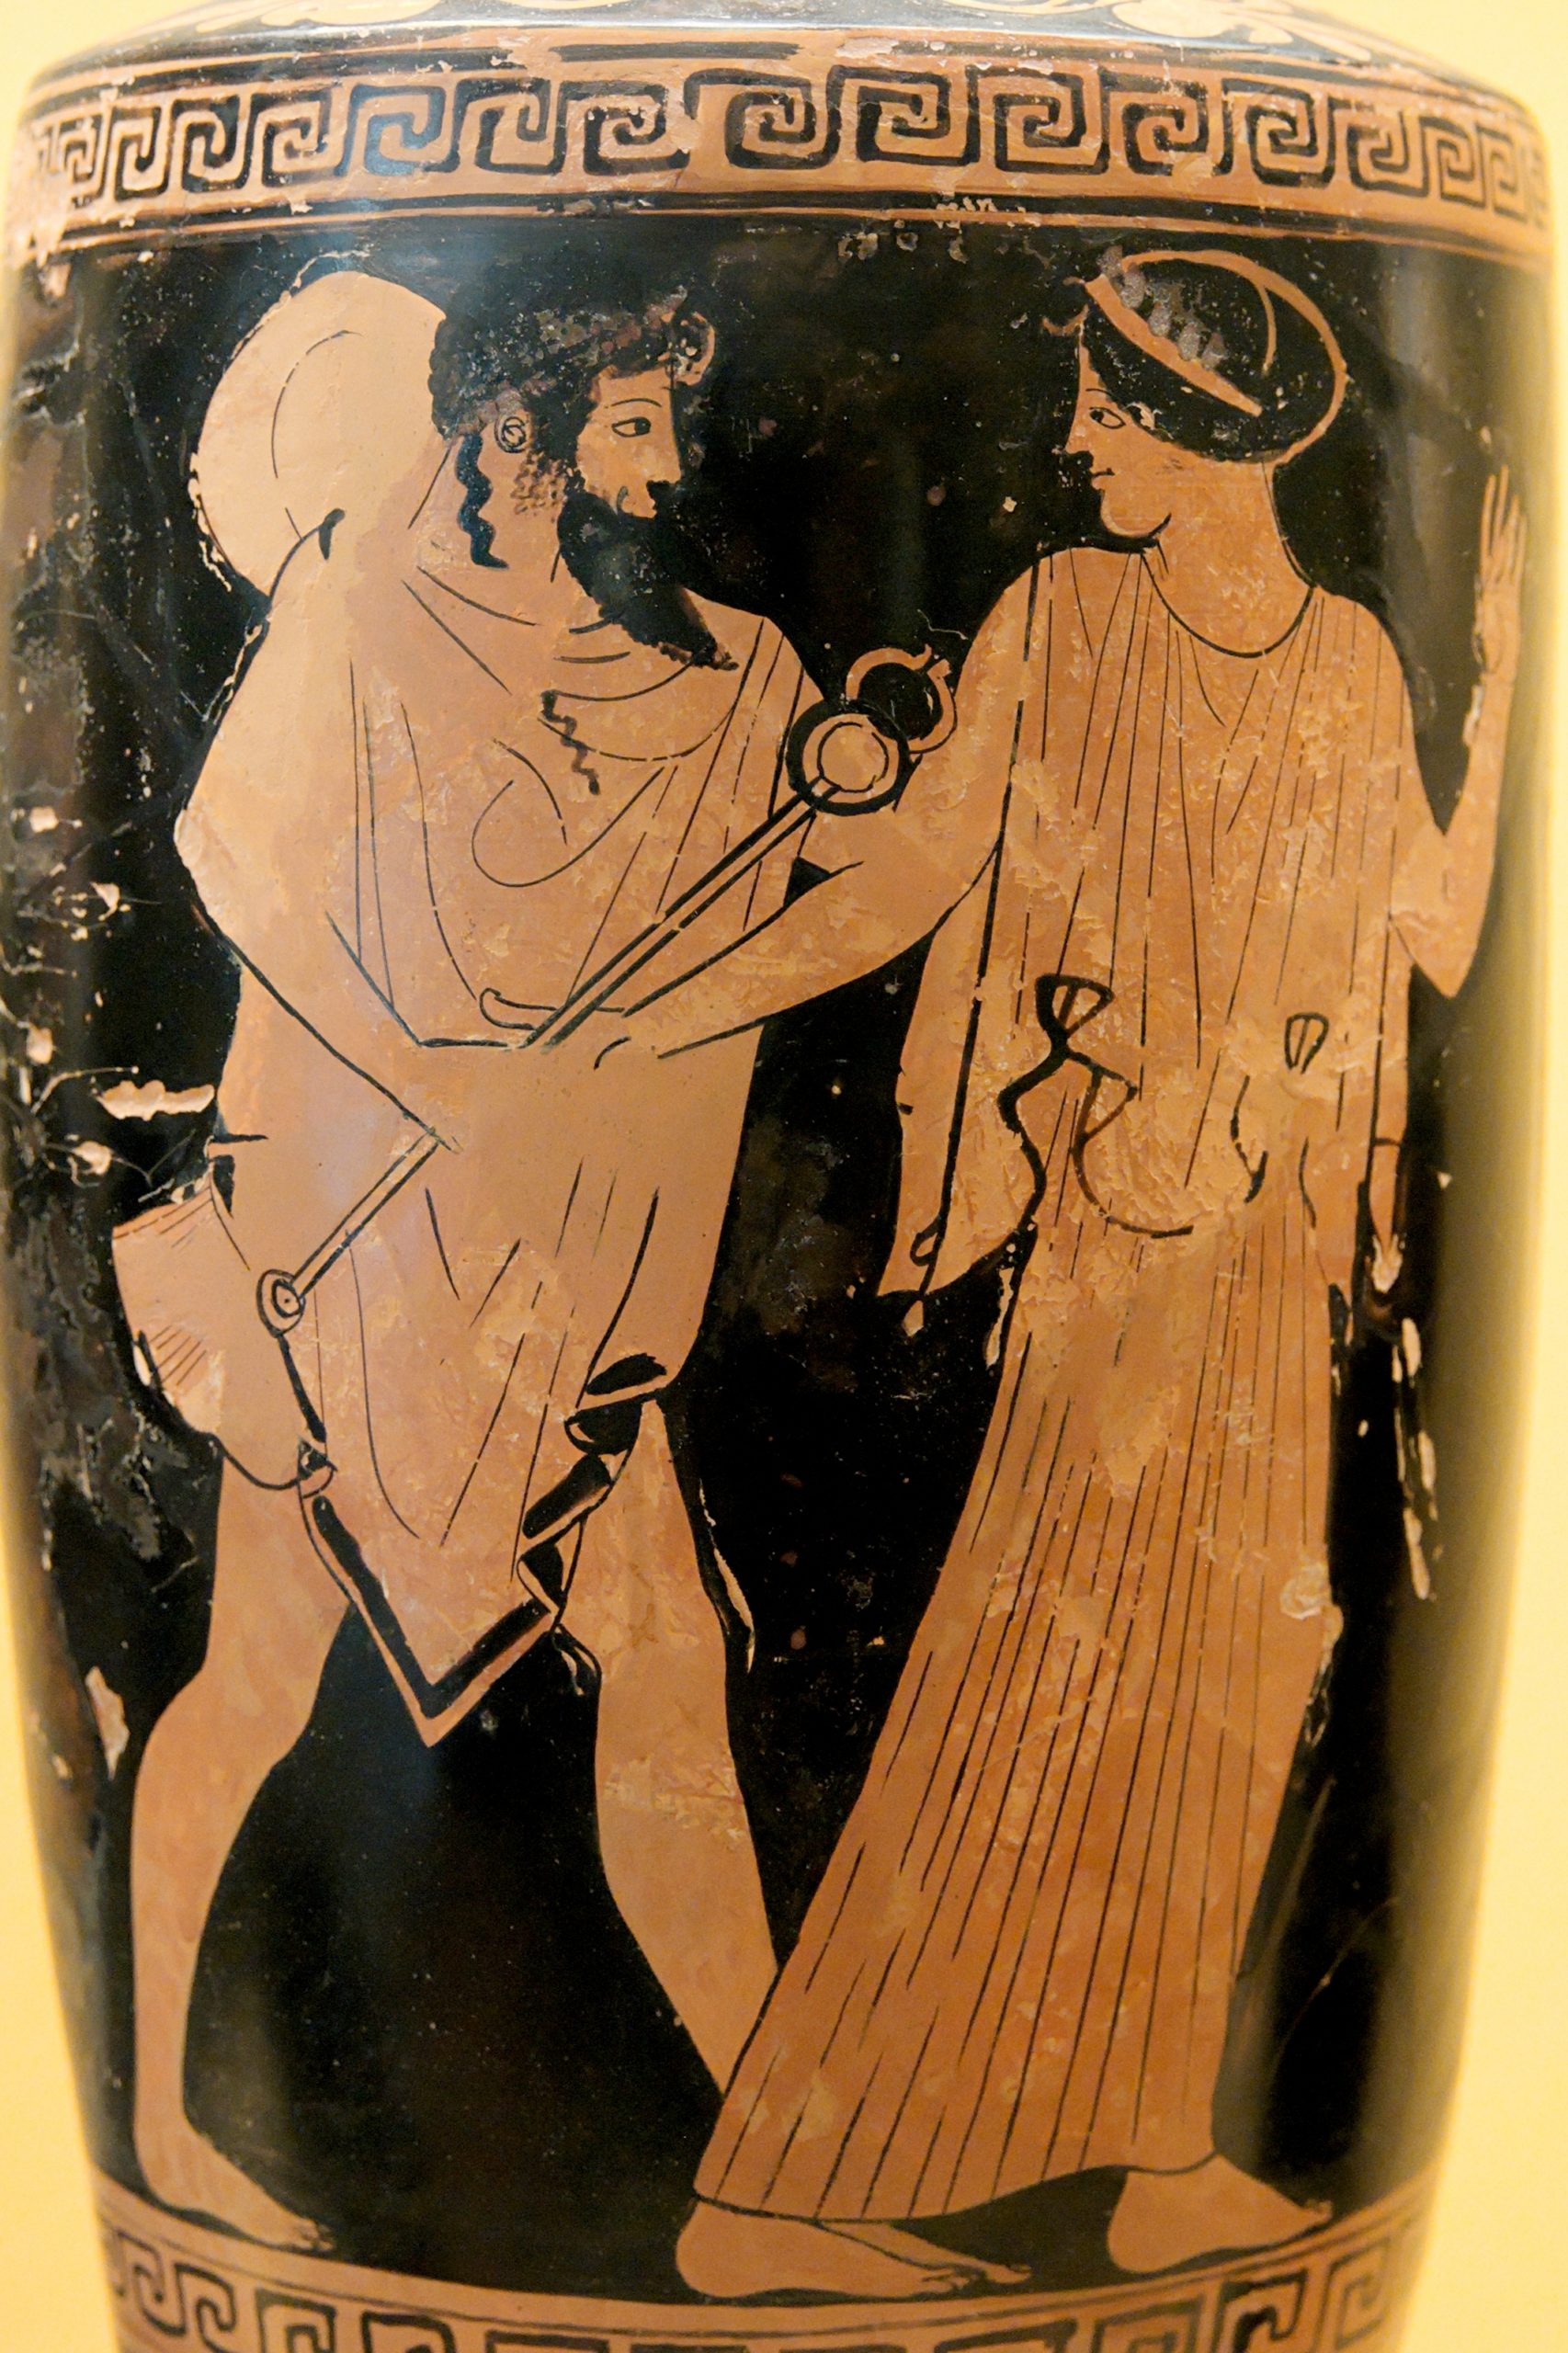 Hermes, a bearded man, grabs the arm of a young woman.